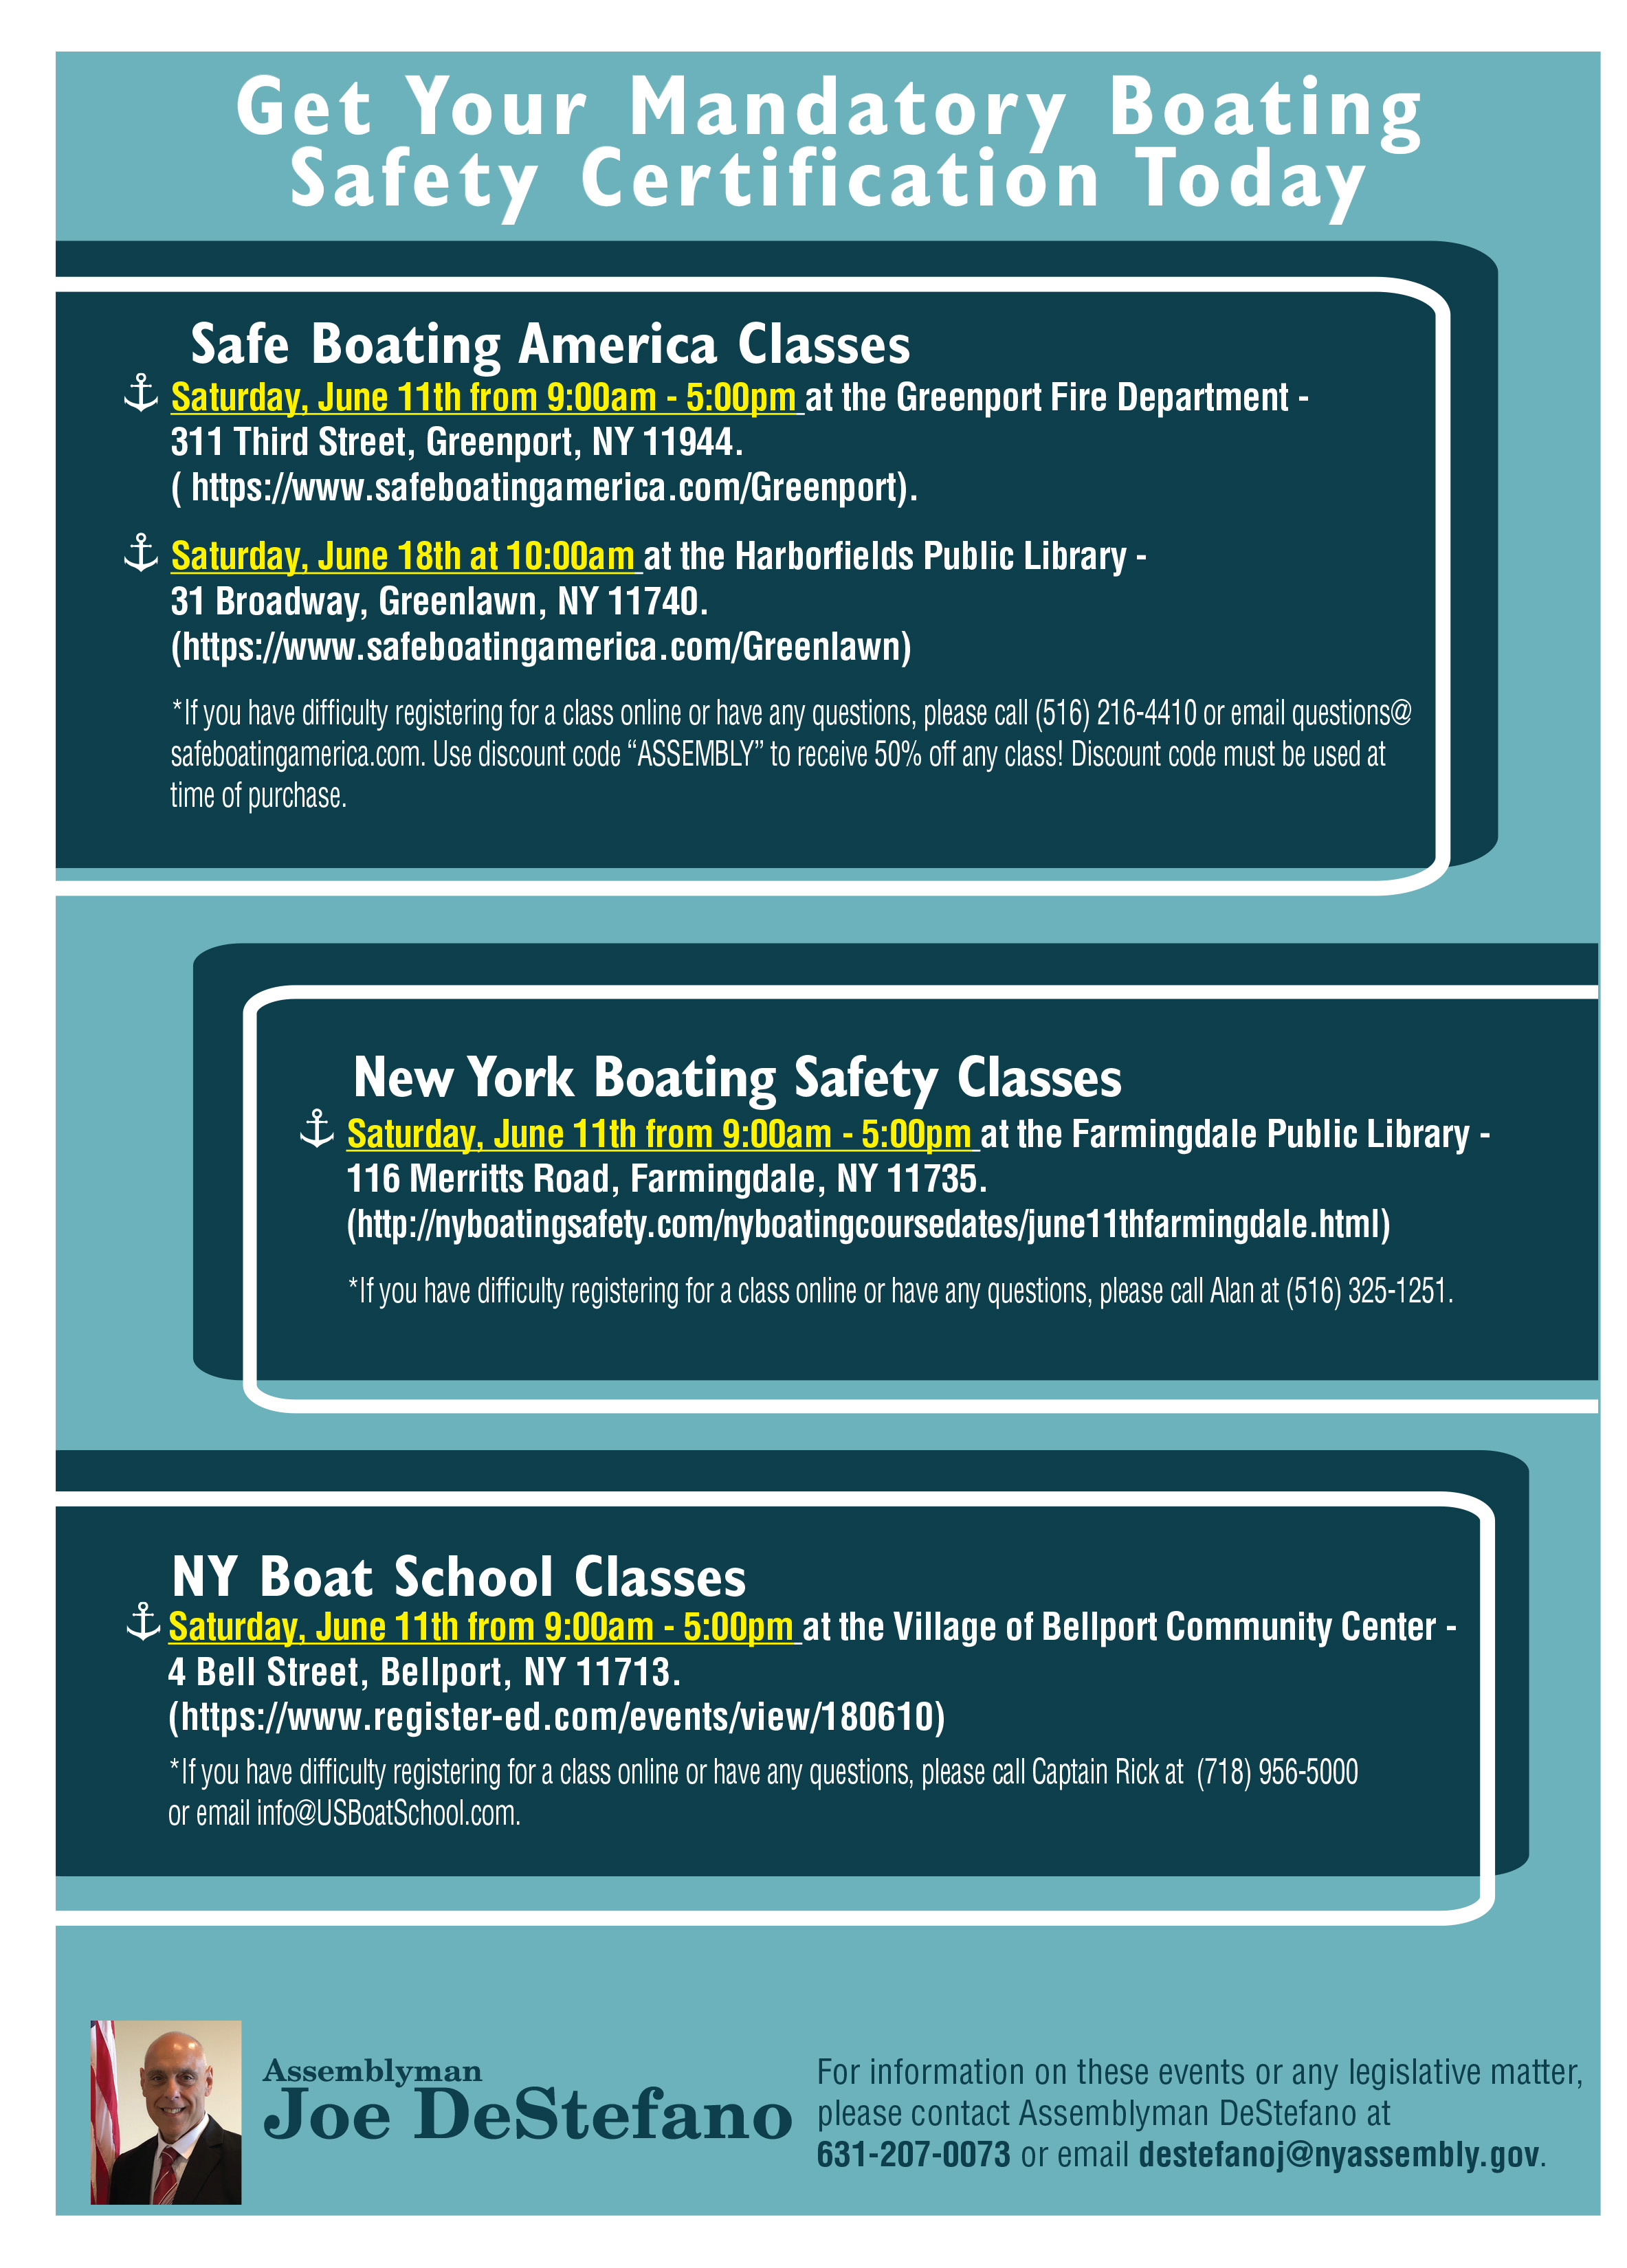 Get Your Mandatory Boating Safety Certification Today